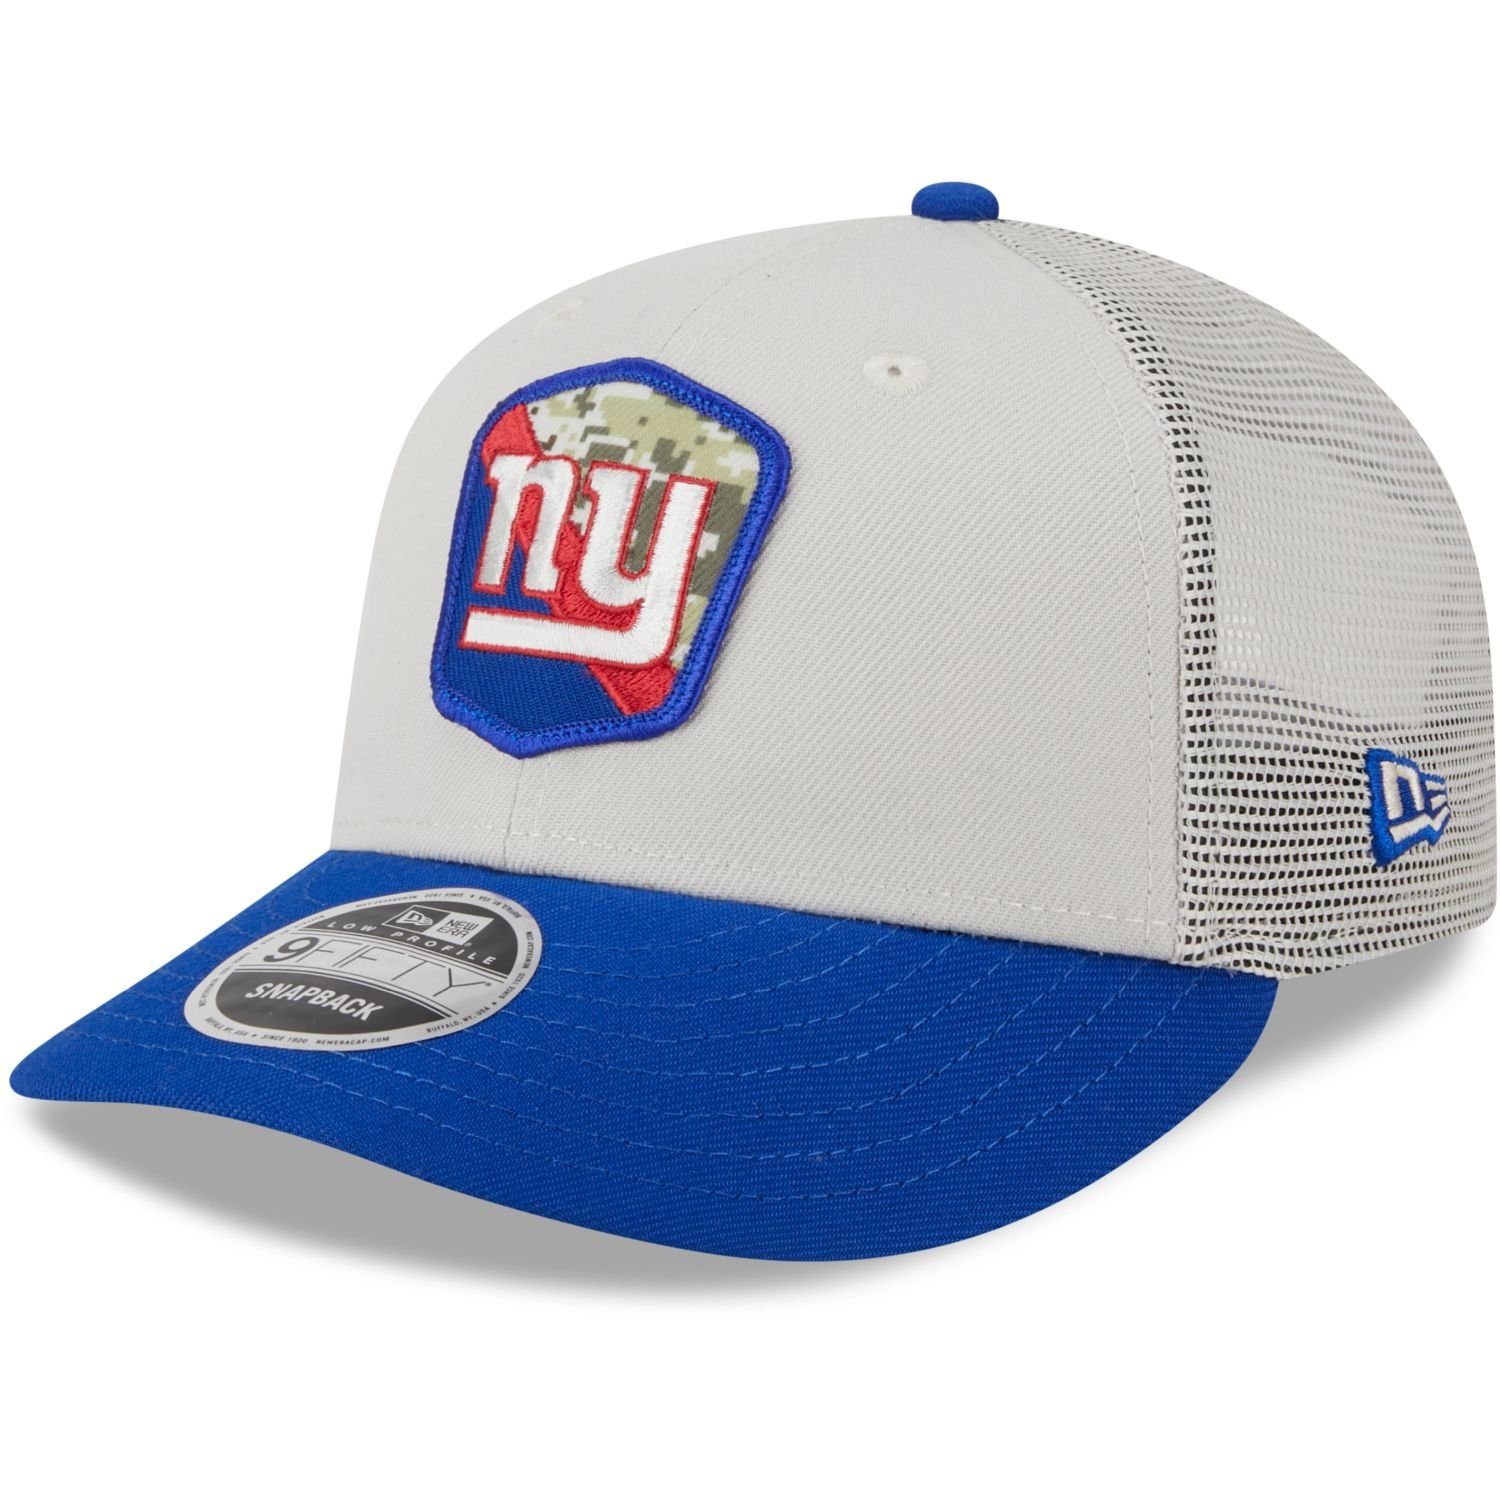 Snap to Cap Service Salute Giants 9Fifty Low NFL York Era New Profile New Snapback